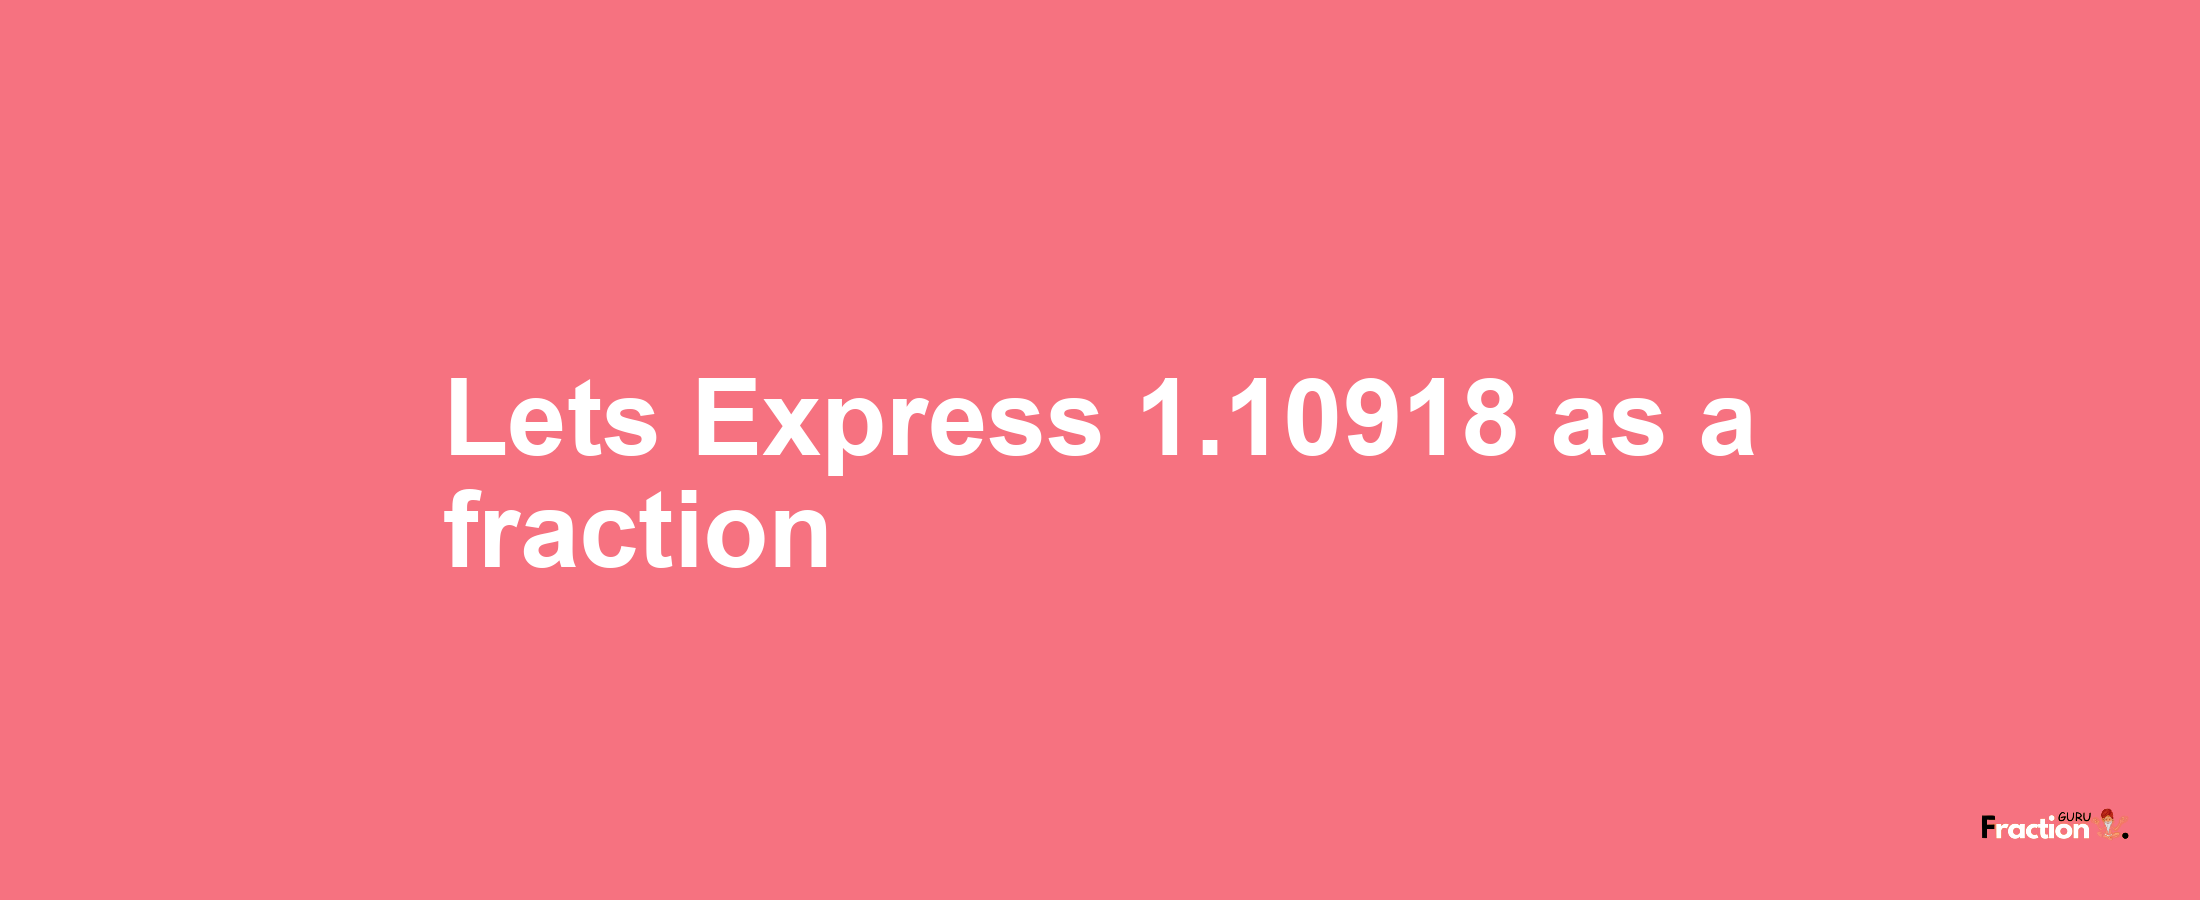 Lets Express 1.10918 as afraction